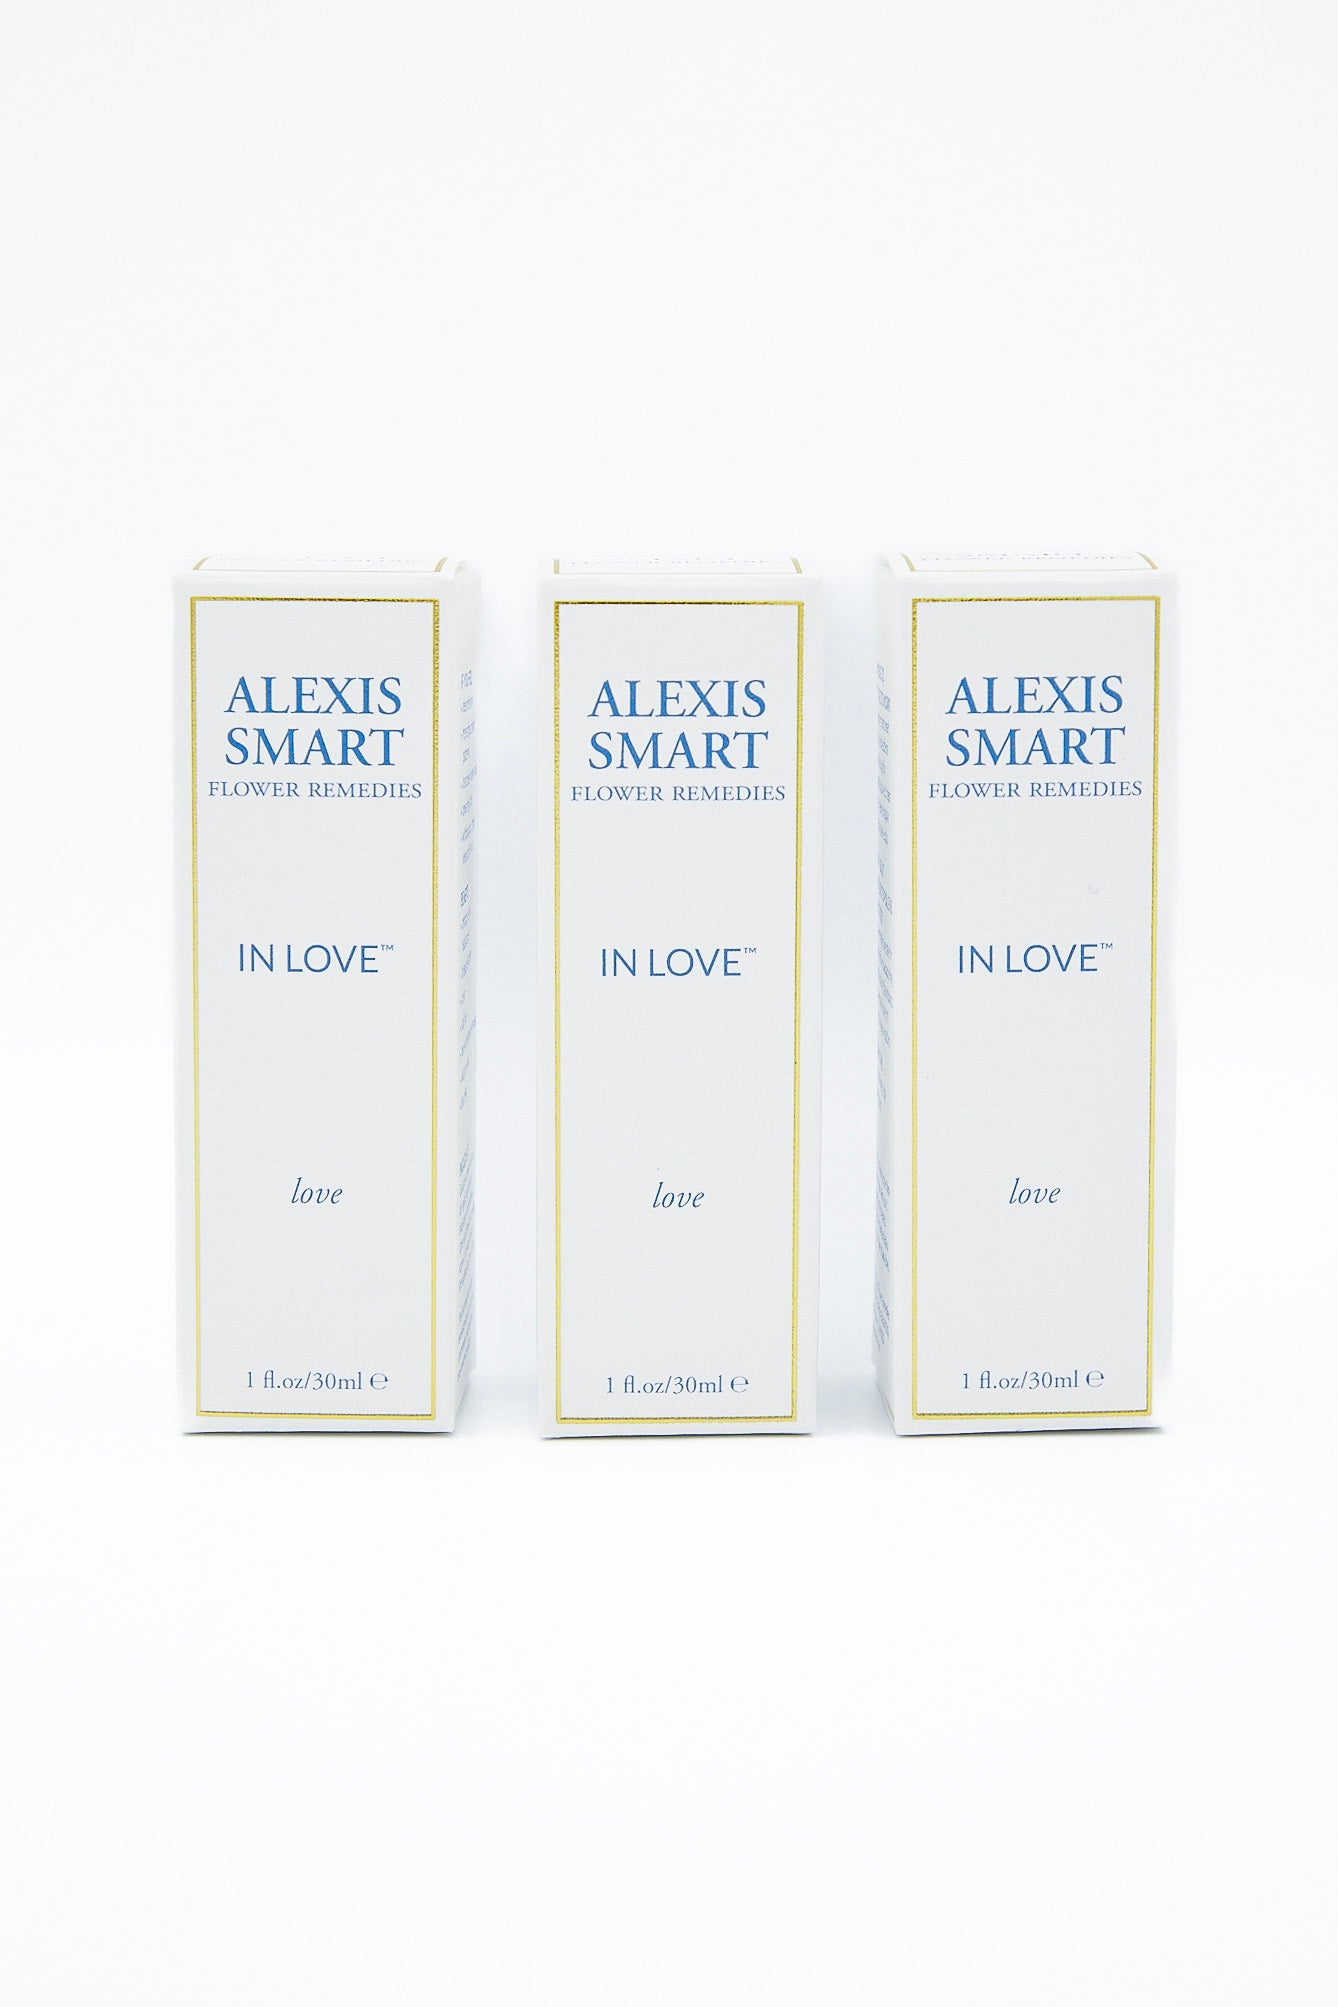 Alexis Smart Flower Remedies - In Love - 3 pcs. Experience the transformative power of self-love and explore the intricacies of relationships with this set of 3 Alexis Smart Flower Remedies - In Love guides.